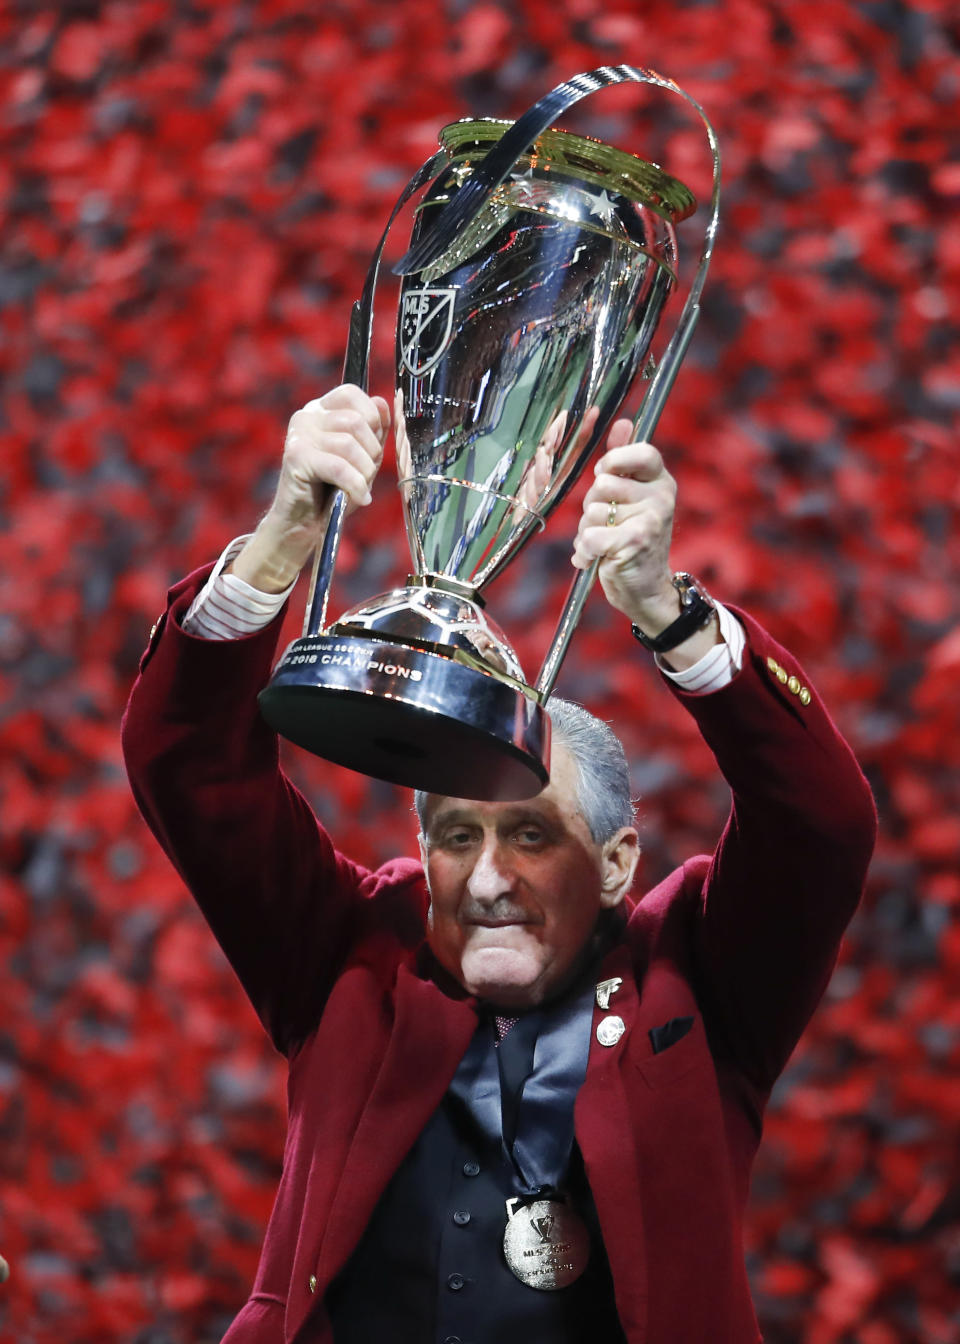 Atlanta United owner Arthur Blank holds up the trophy during the presentation after the MLS Cup championship soccer game against the Portland Timbers, Saturday, Dec. 8, 2018, in Atlanta. Atlanta United won 2-0. (AP Photo/Todd Kirkland)